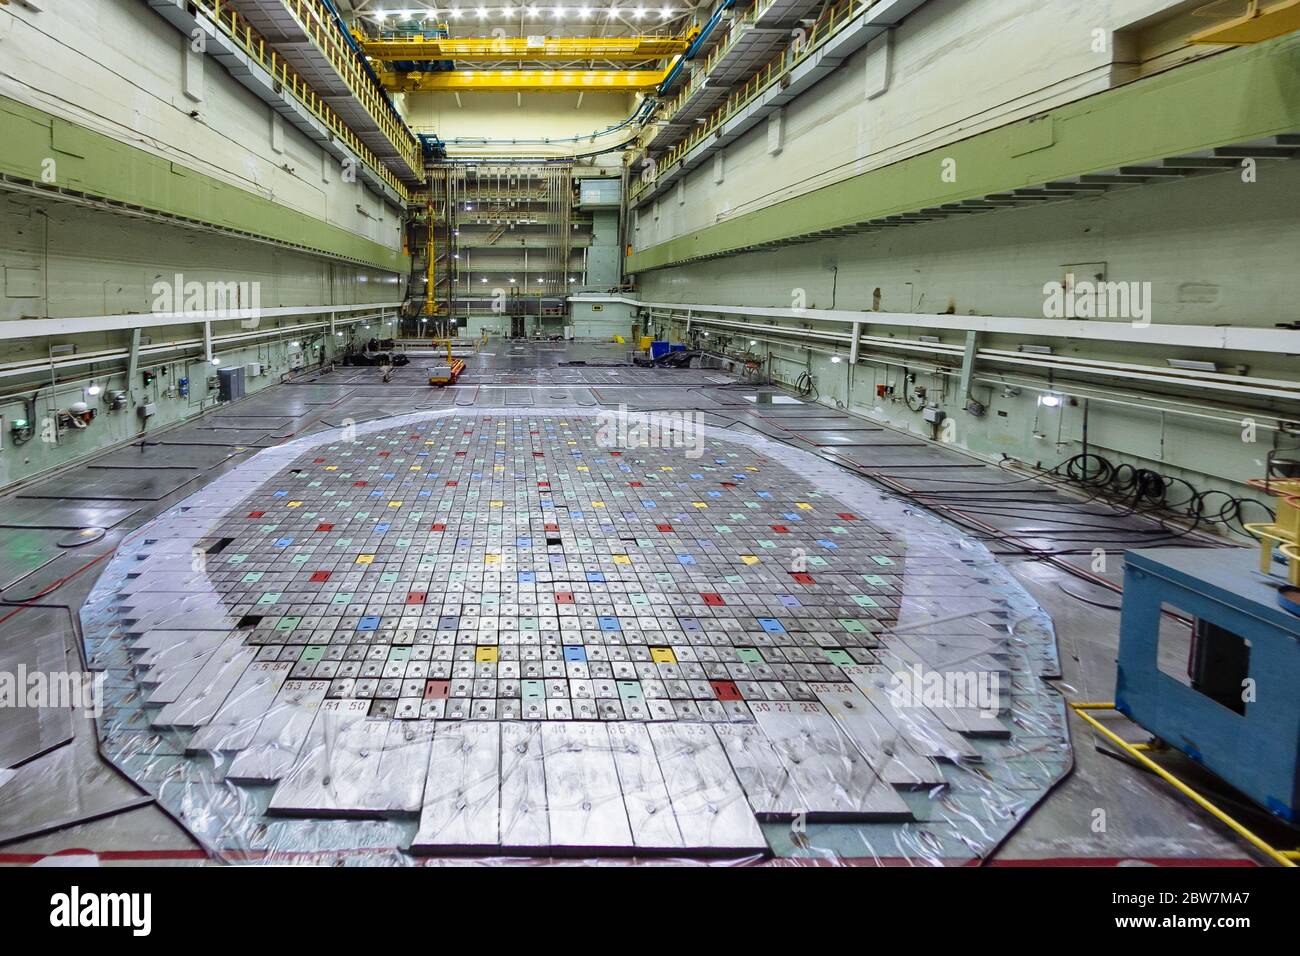 Nuclear power plant. Central hall of the nuclear reactor, reactor lid, maintenance and replacement of the reactor fuel elements. Stock Photo